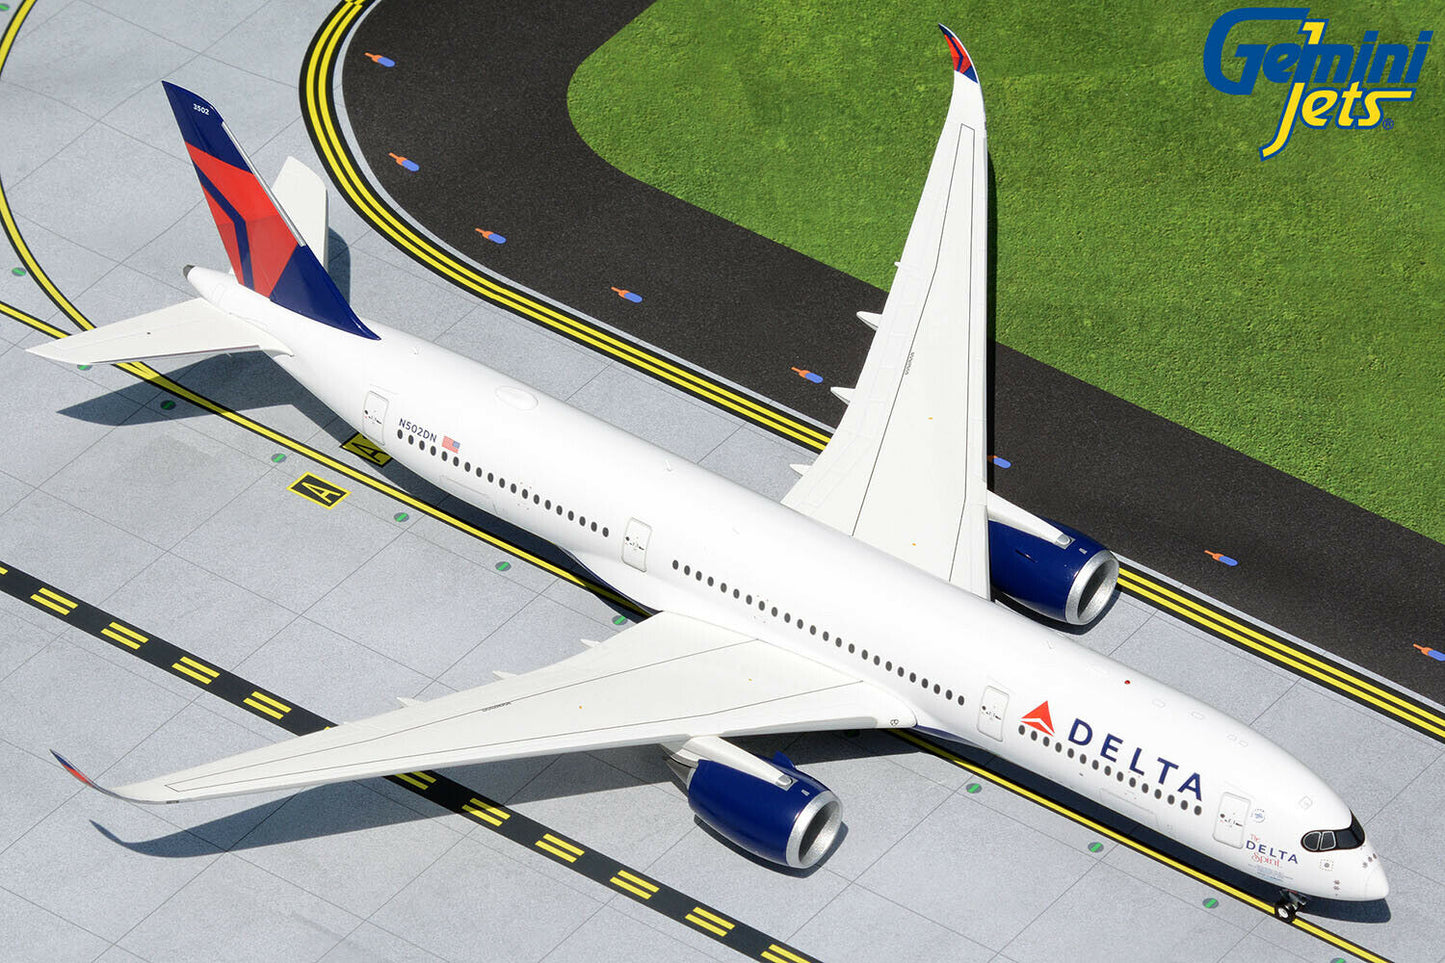 Gemini Jets G2DAL997 1:200 Delta Airlines Airbus A350-900 The Delta Spirit N5202DN